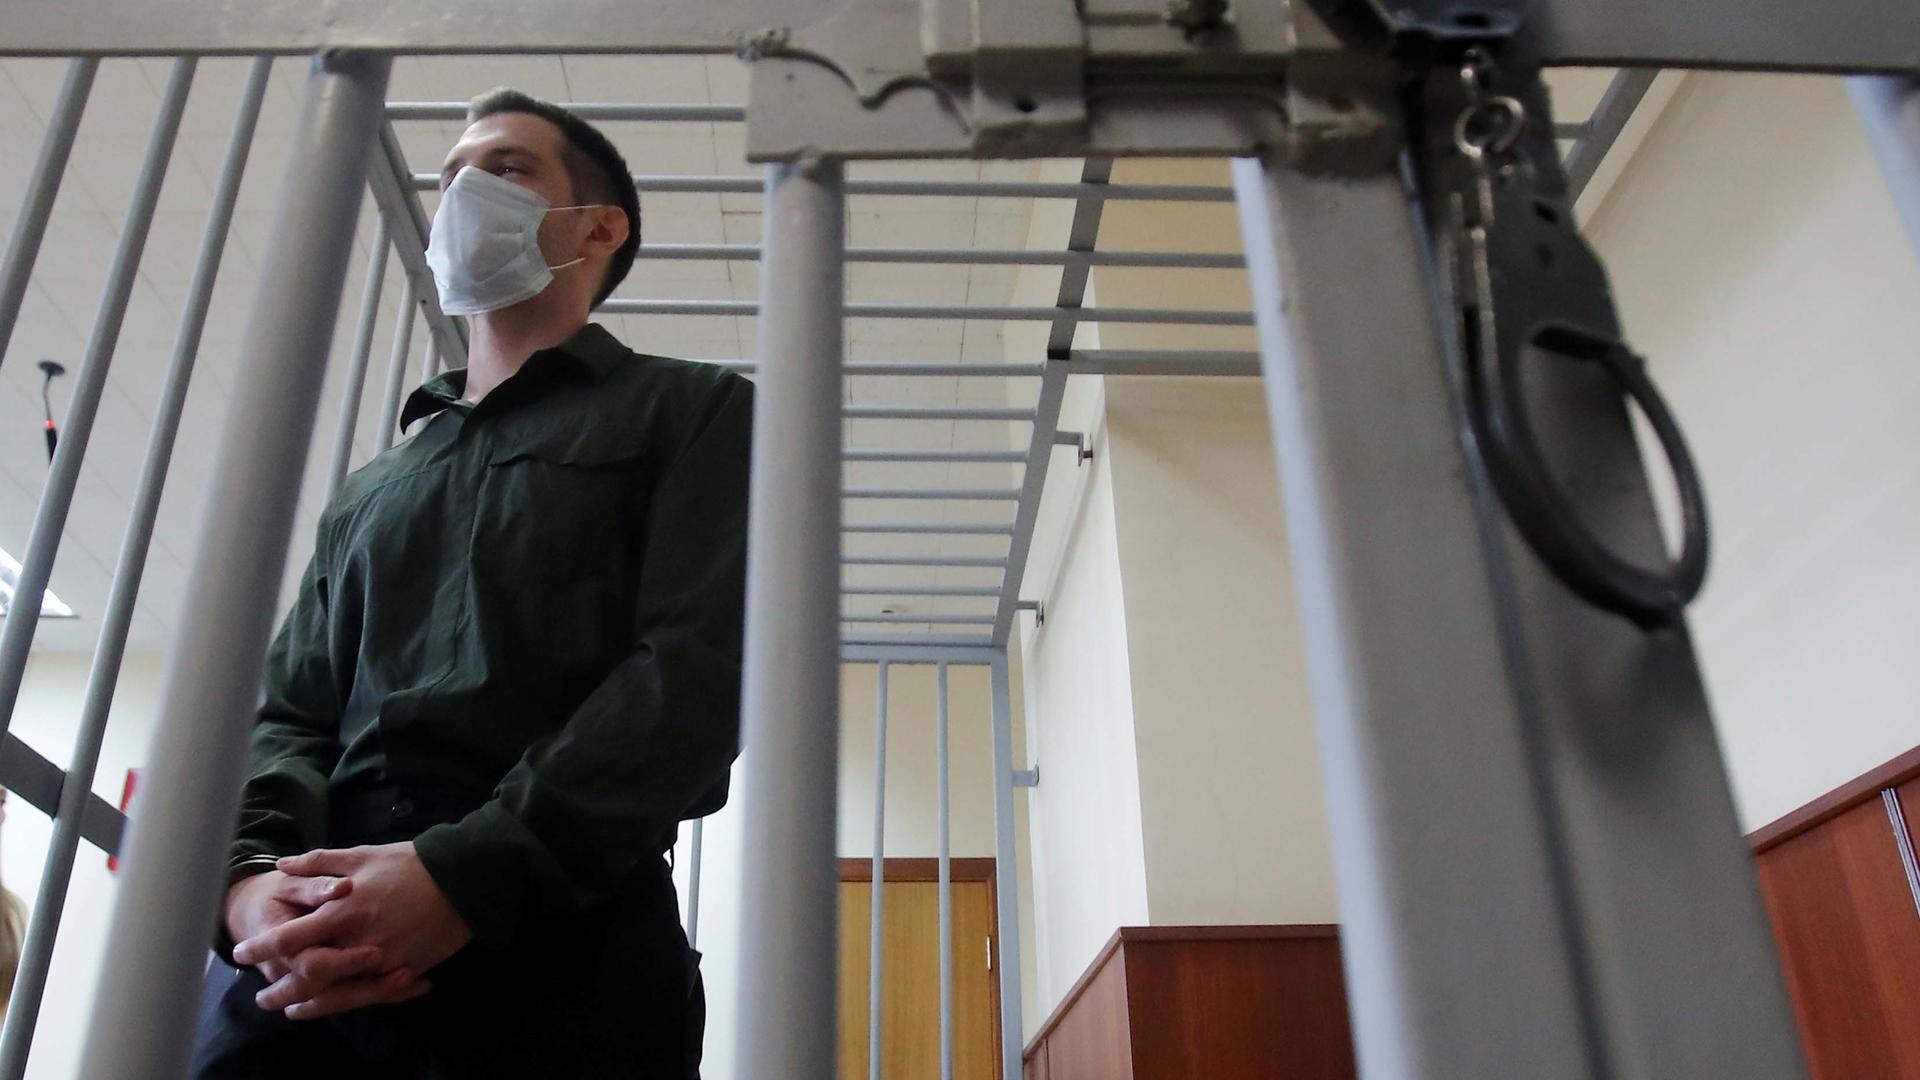 Former US Marine Trevor Reed, who was detained in 2019 and accused of assaulting police officers, stands inside a defendants' cage during a court hearing in Moscow, Russia July 30, 2020.